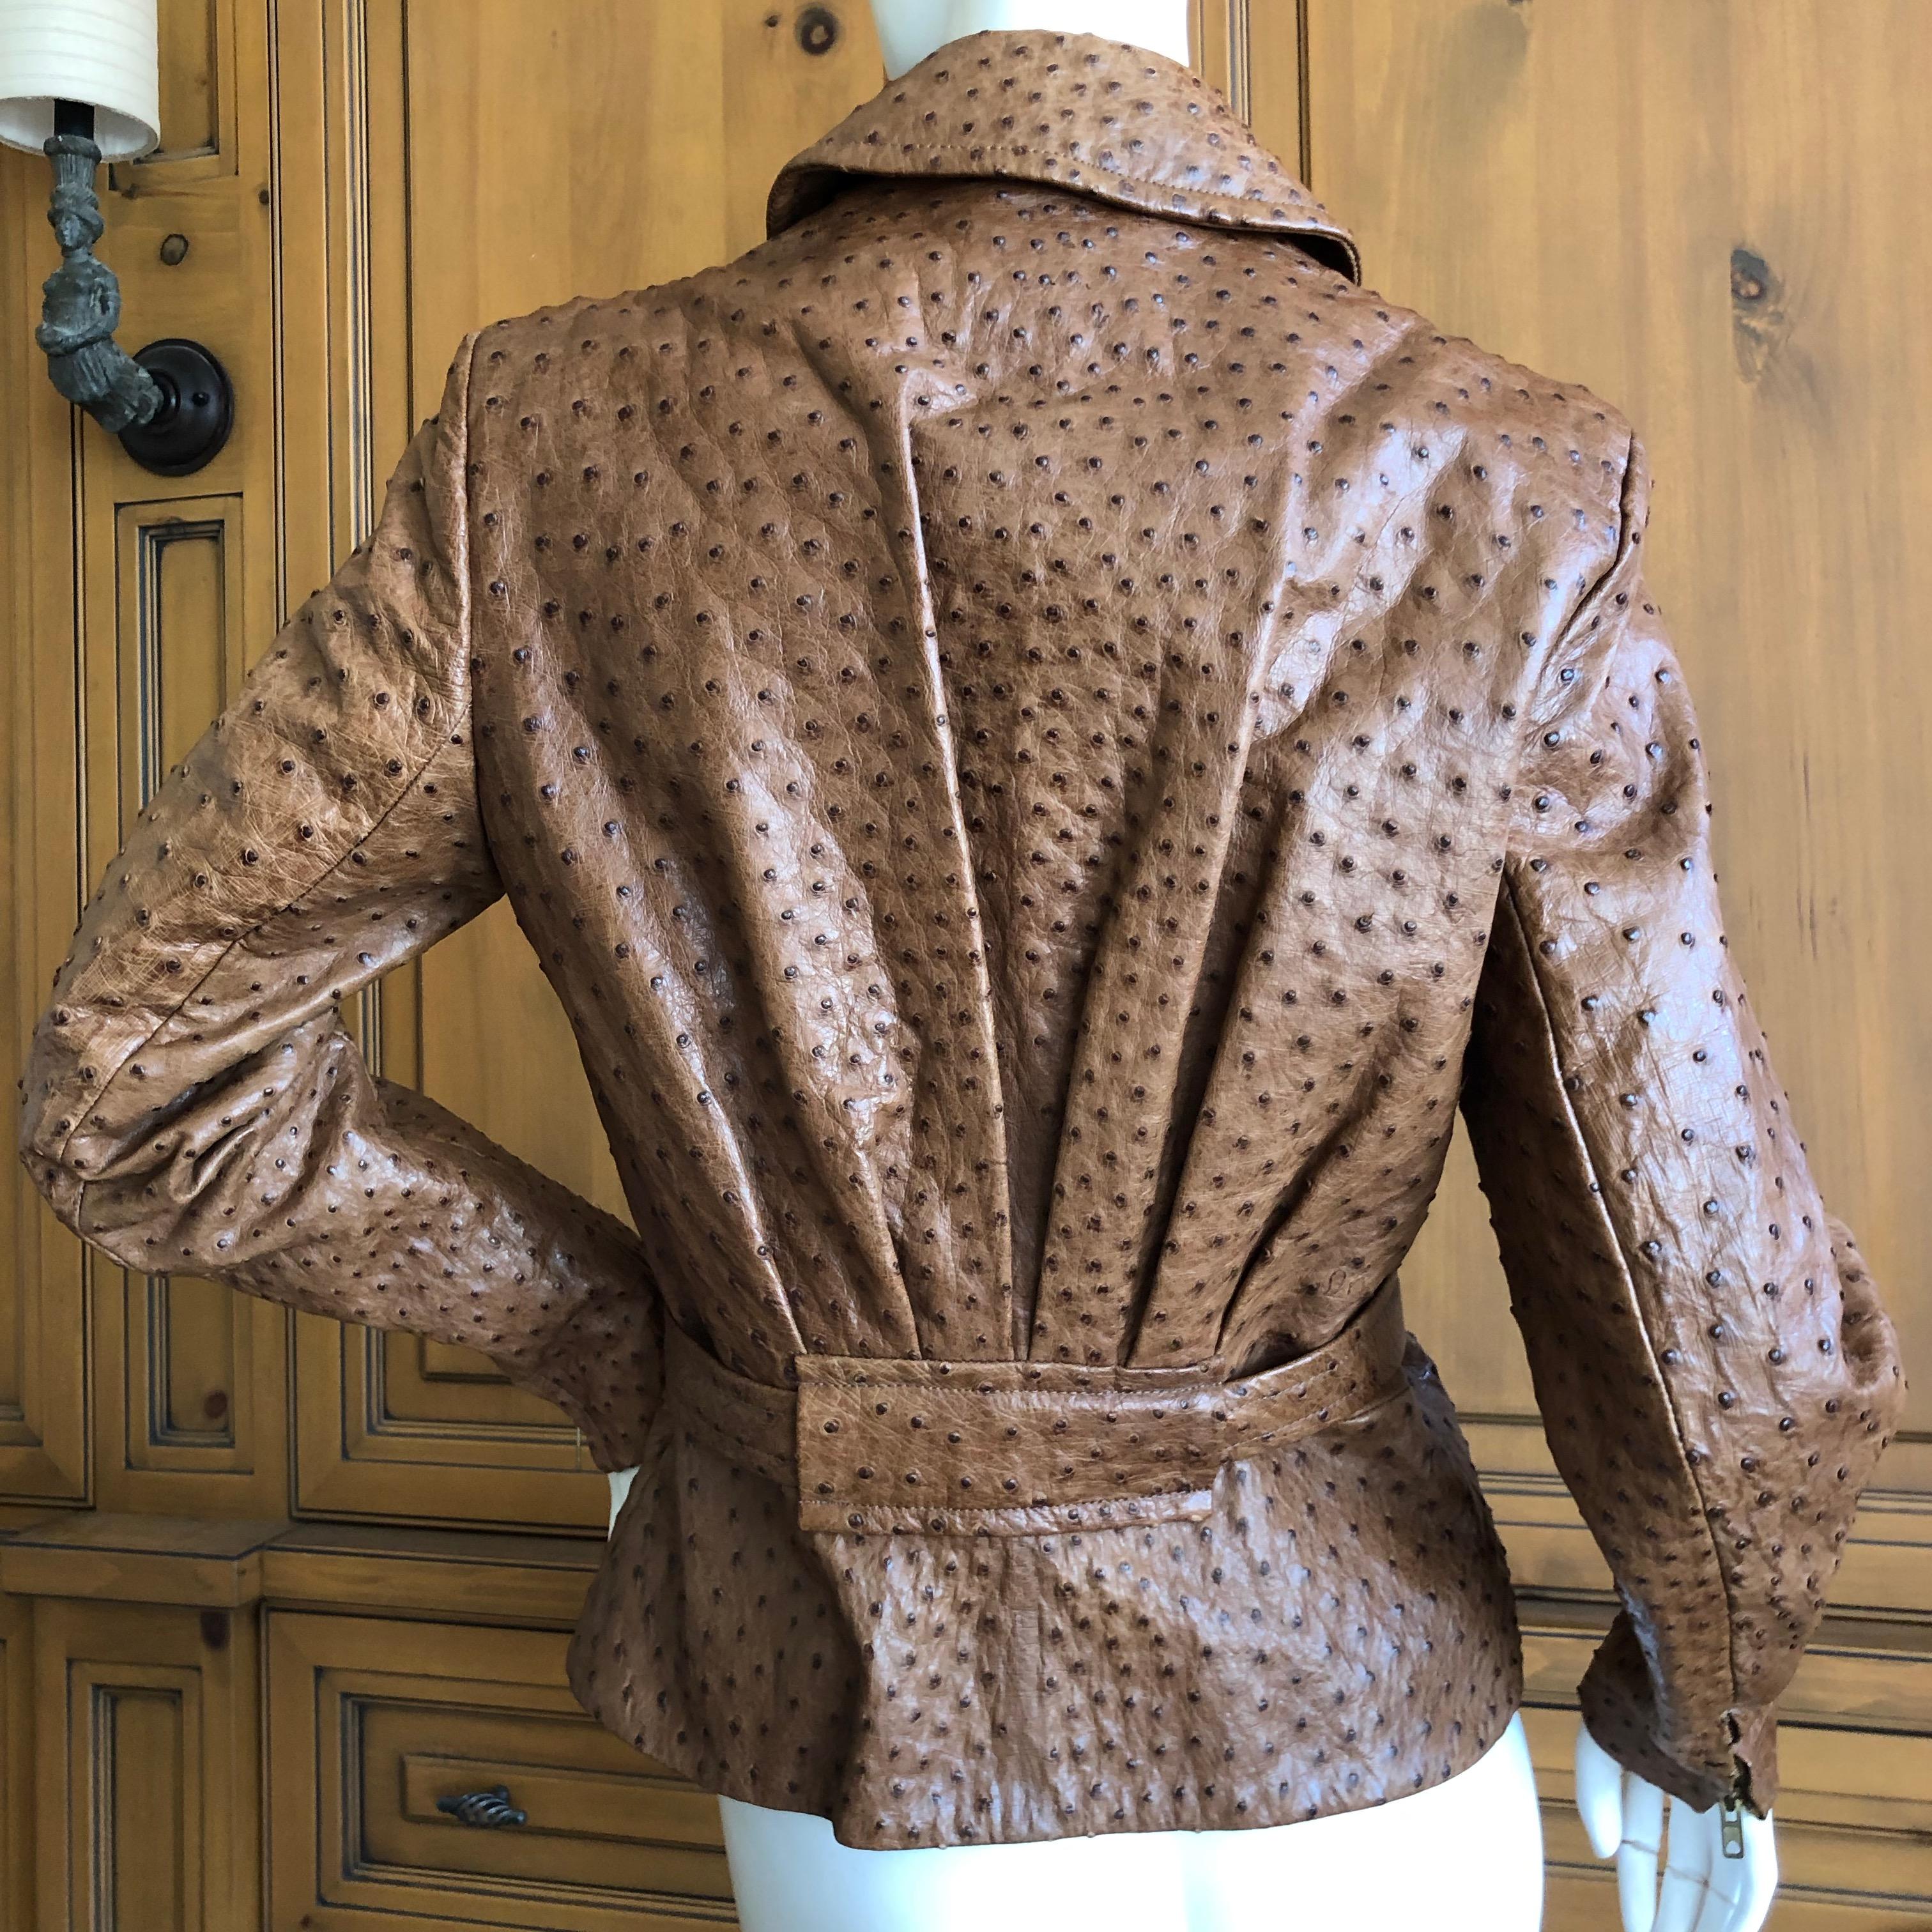 Hermes Paris Extraordinary Vintage Ostrich Motorcycle Suit 
Includes Moto Jacket and Pants.
This is a really special vintage suit. This is fully lined in Hermes silk H fabric.
This is so beautifully made,  such attention to detail is remarkable.
In